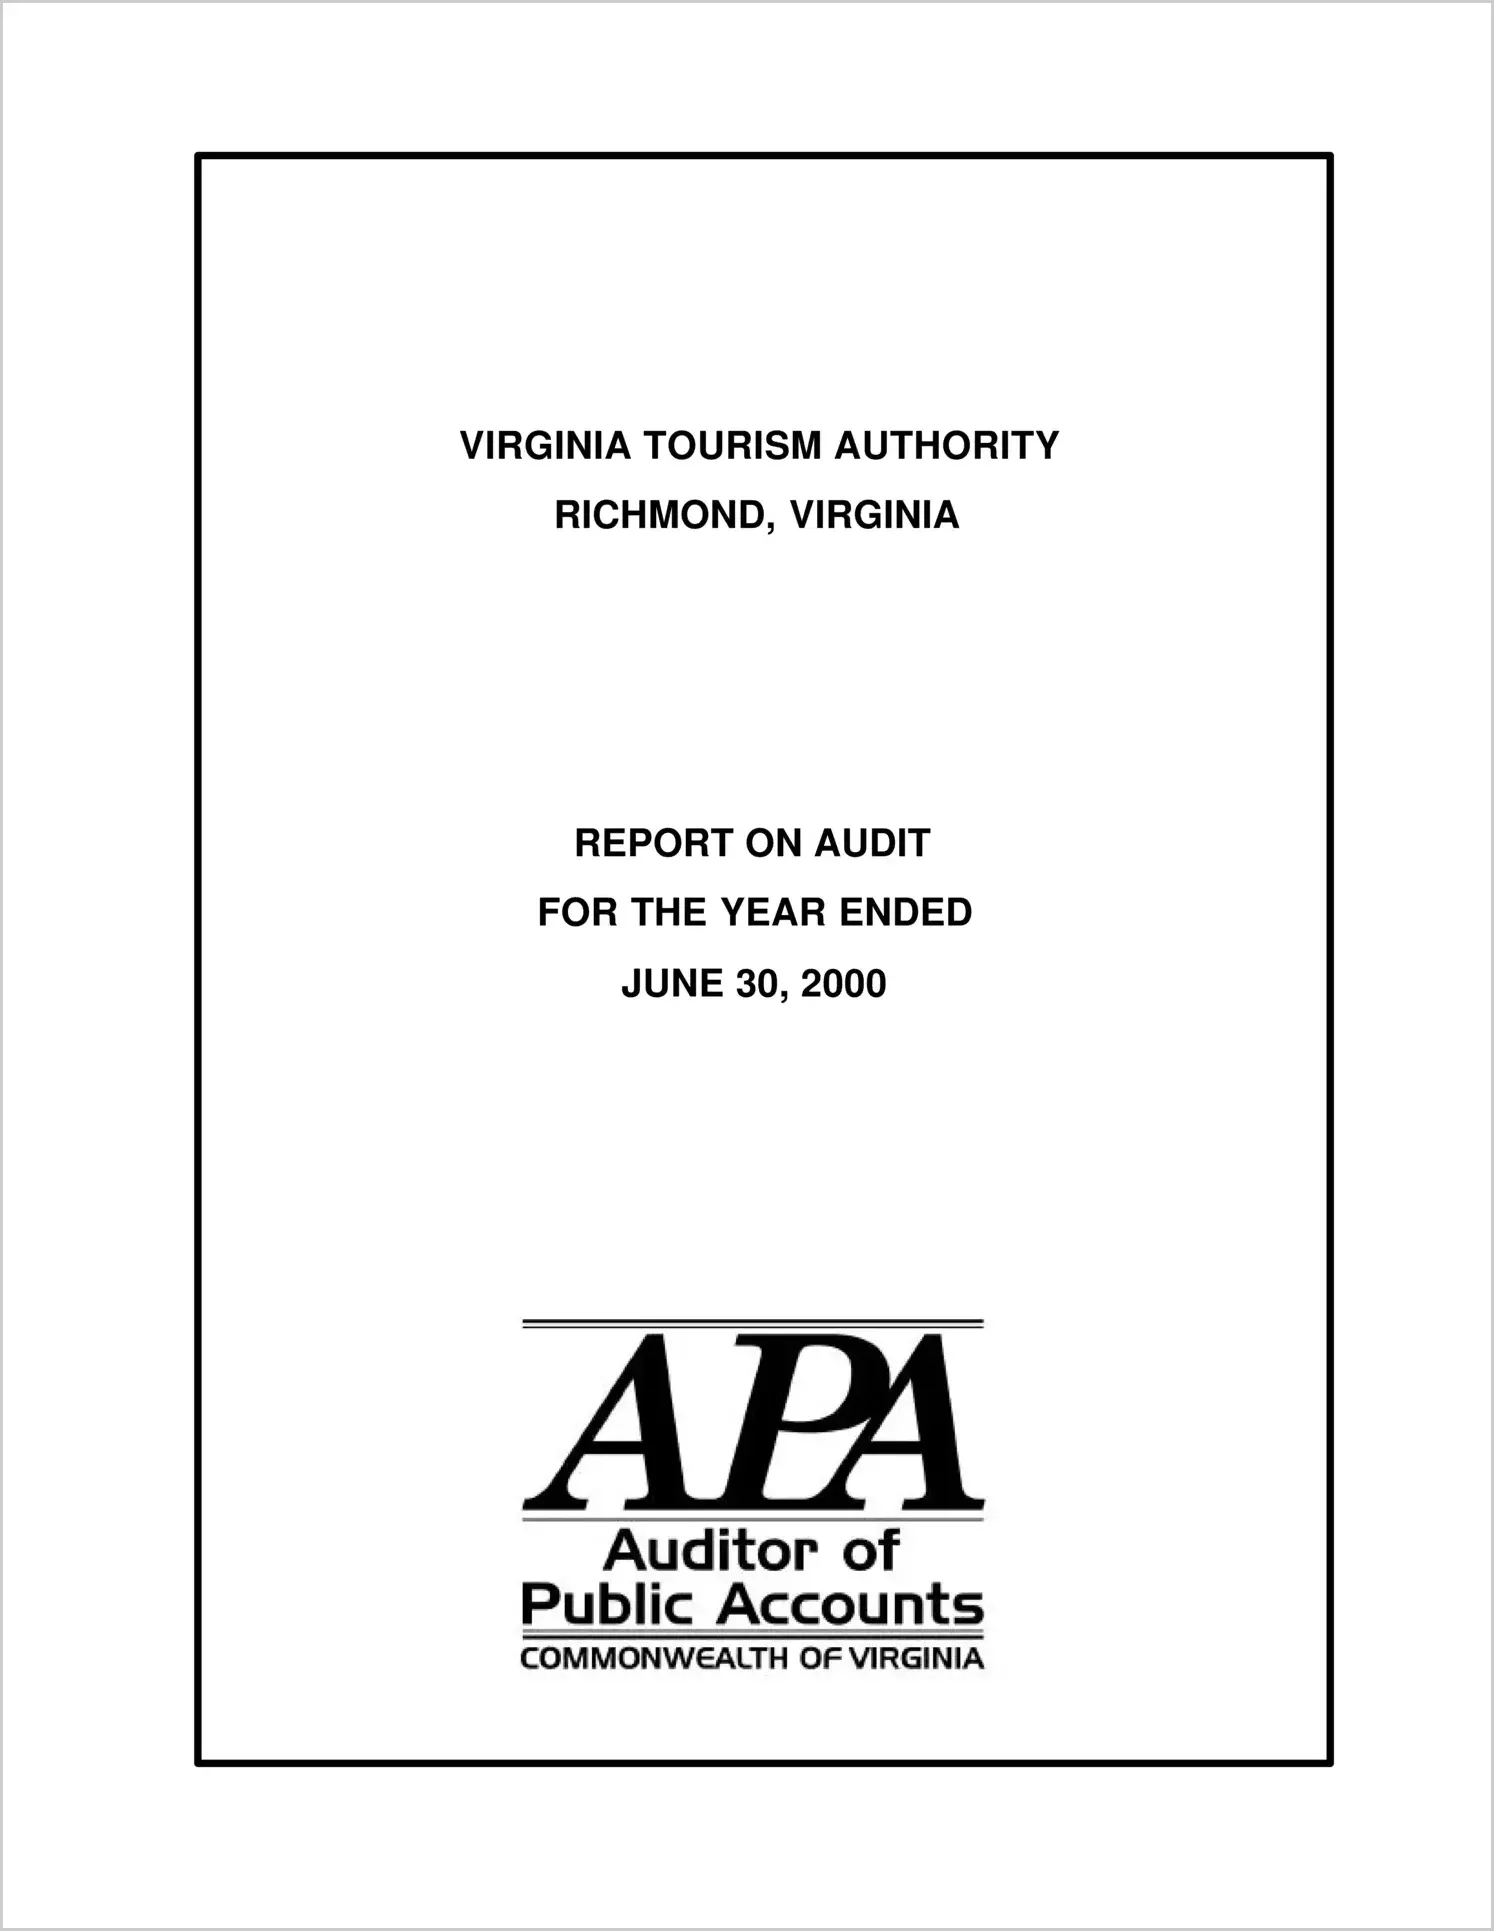 Virginia Tourism Authority for the year ended June 30, 2000